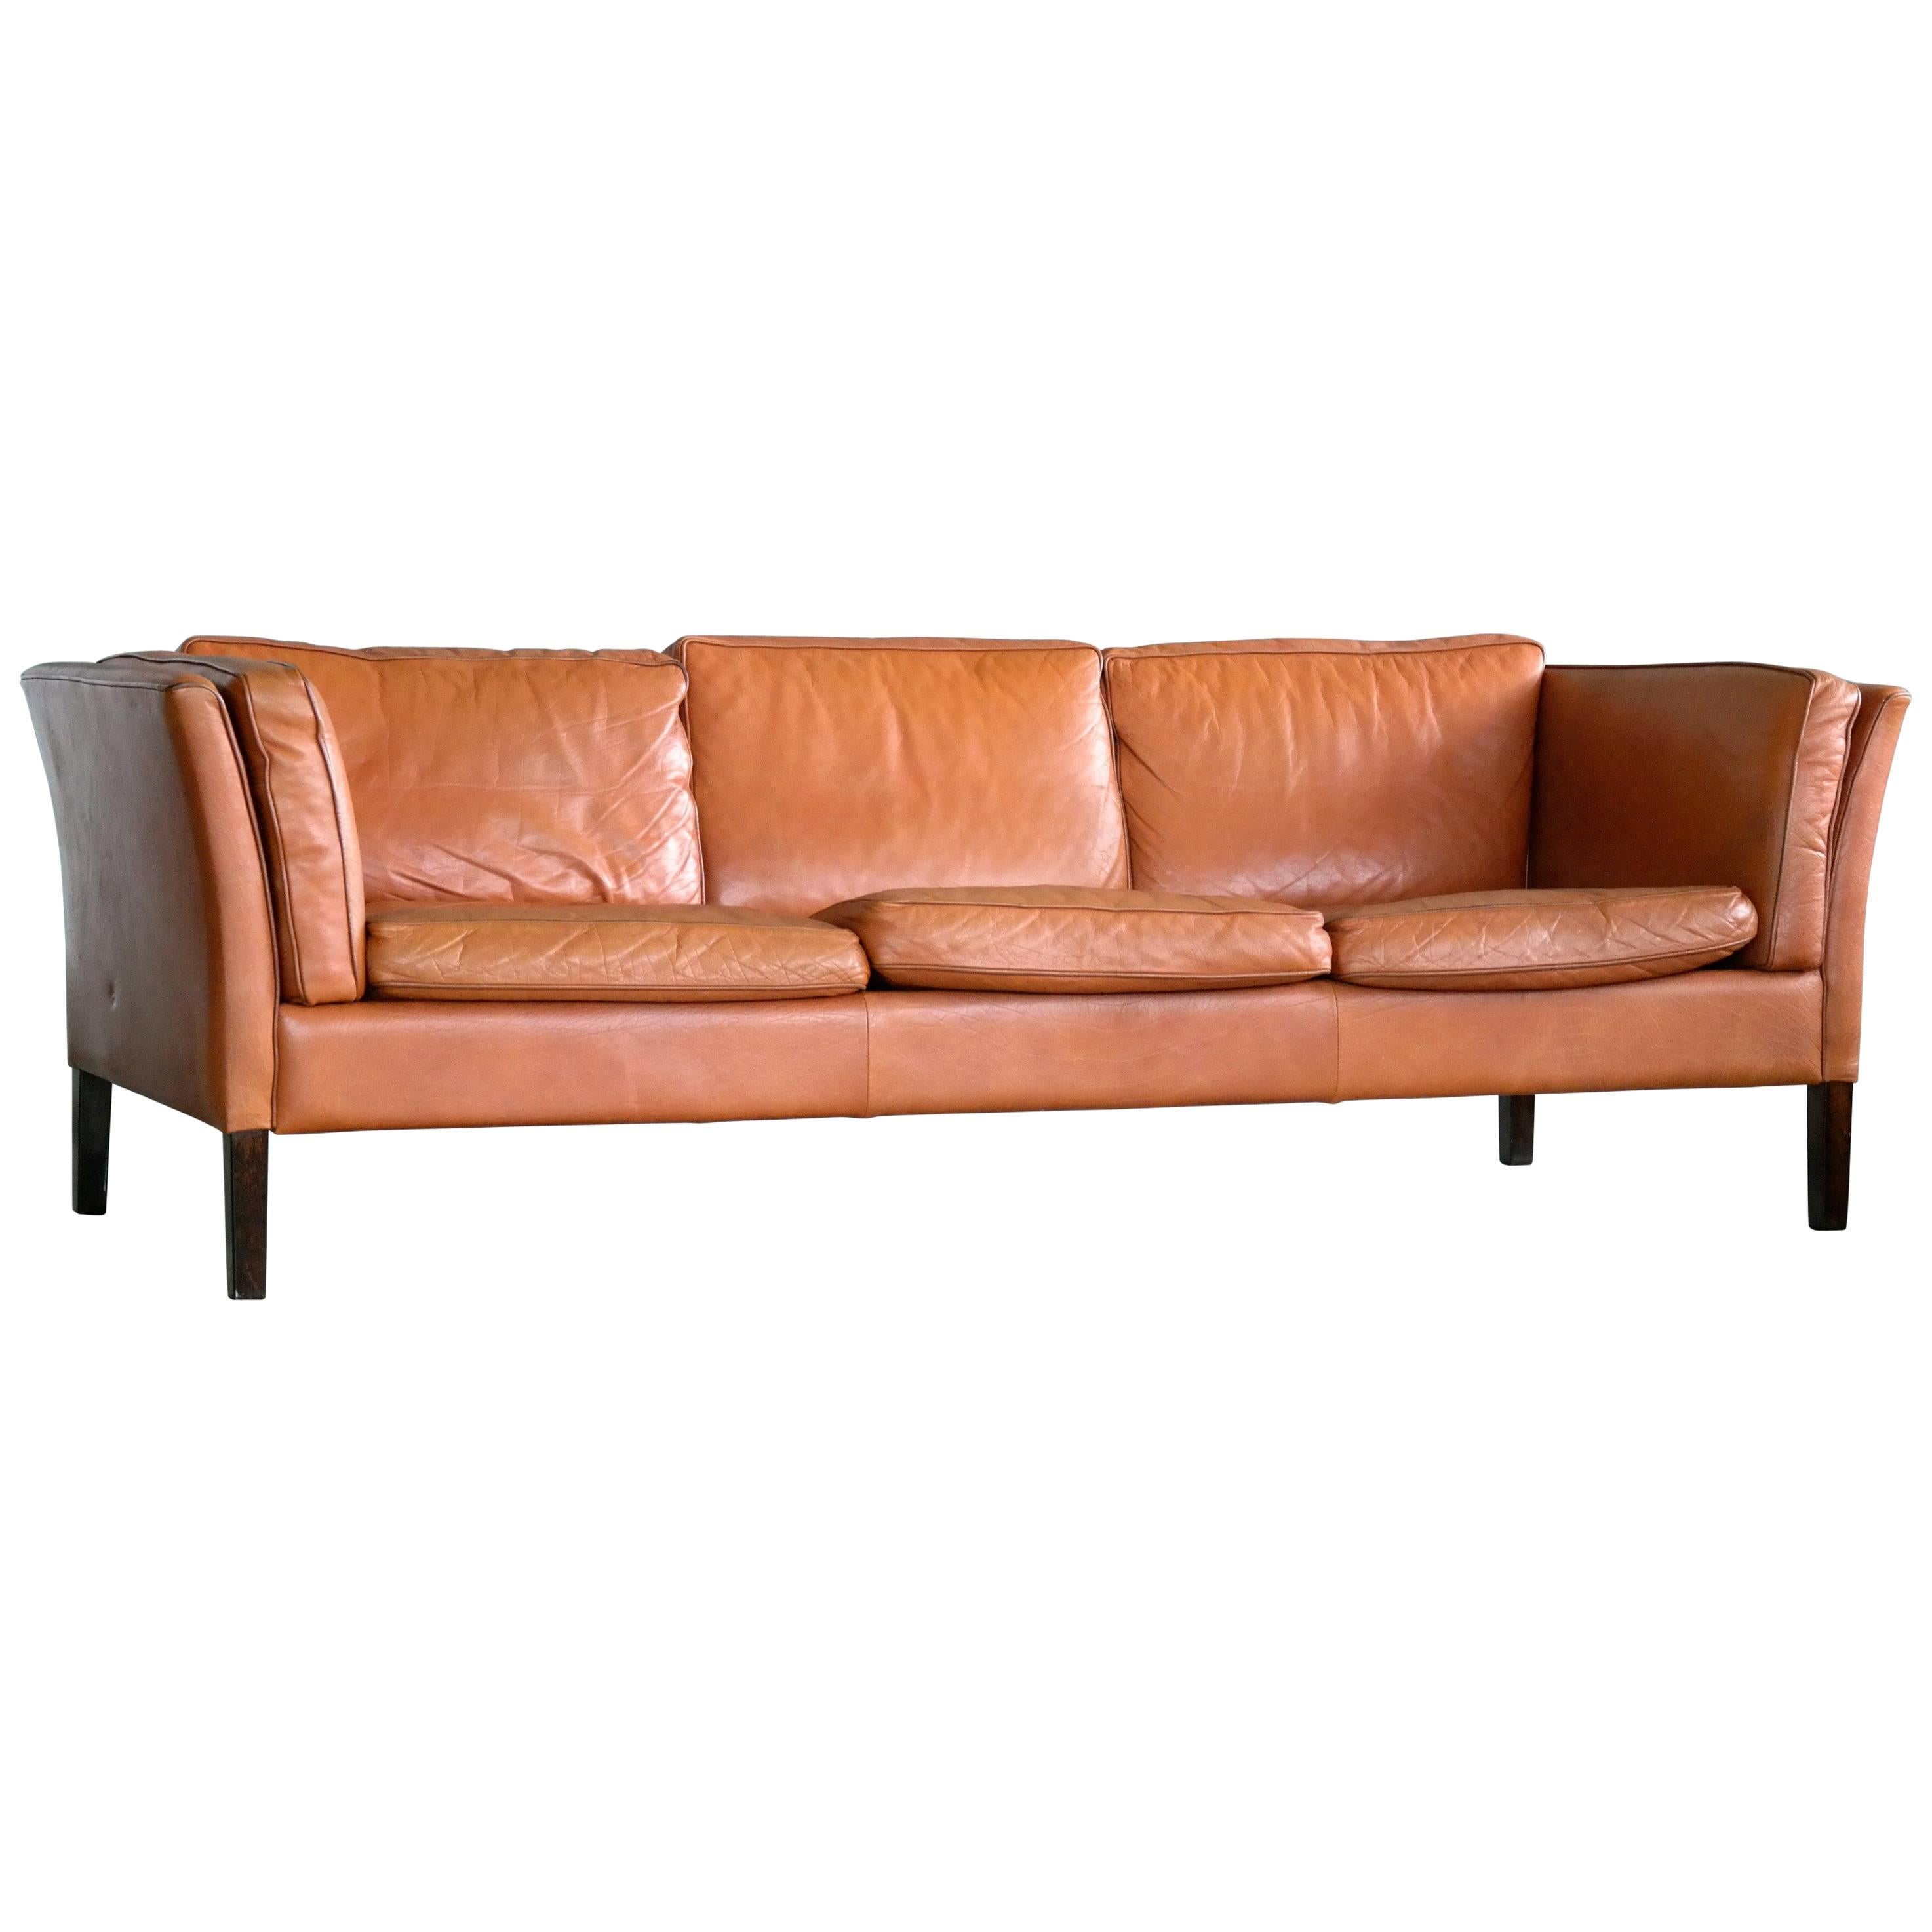 Borge Mogensen Style Danish Three-Seat Leather Sofa in Patinated Cognac Leather